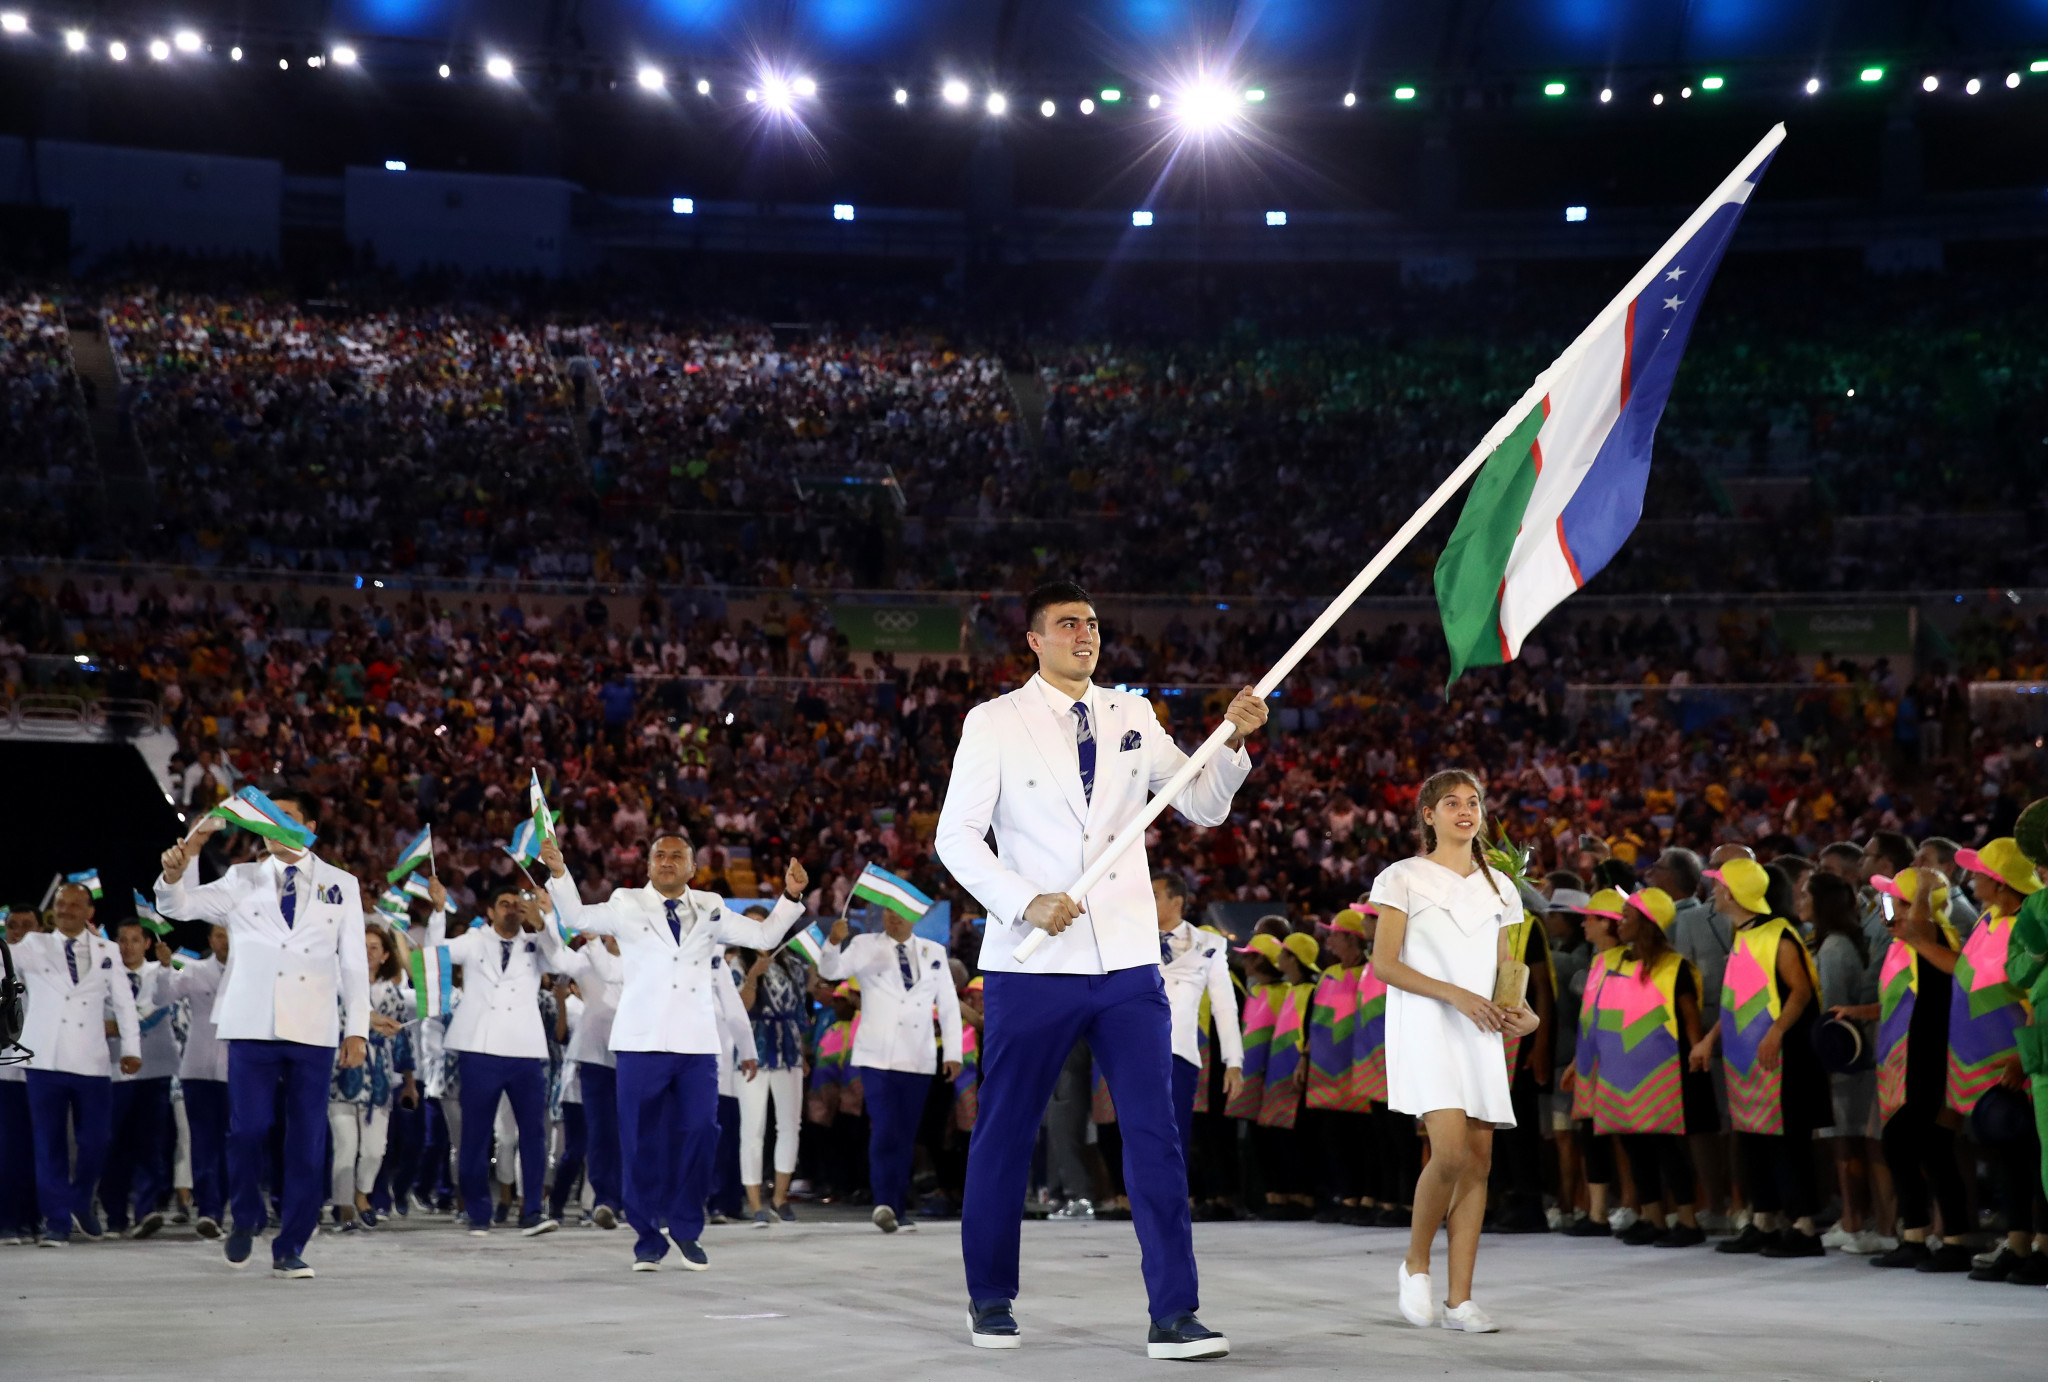 Uzbekistan NOC brief country's leadership on athlete welfare during COVID-19